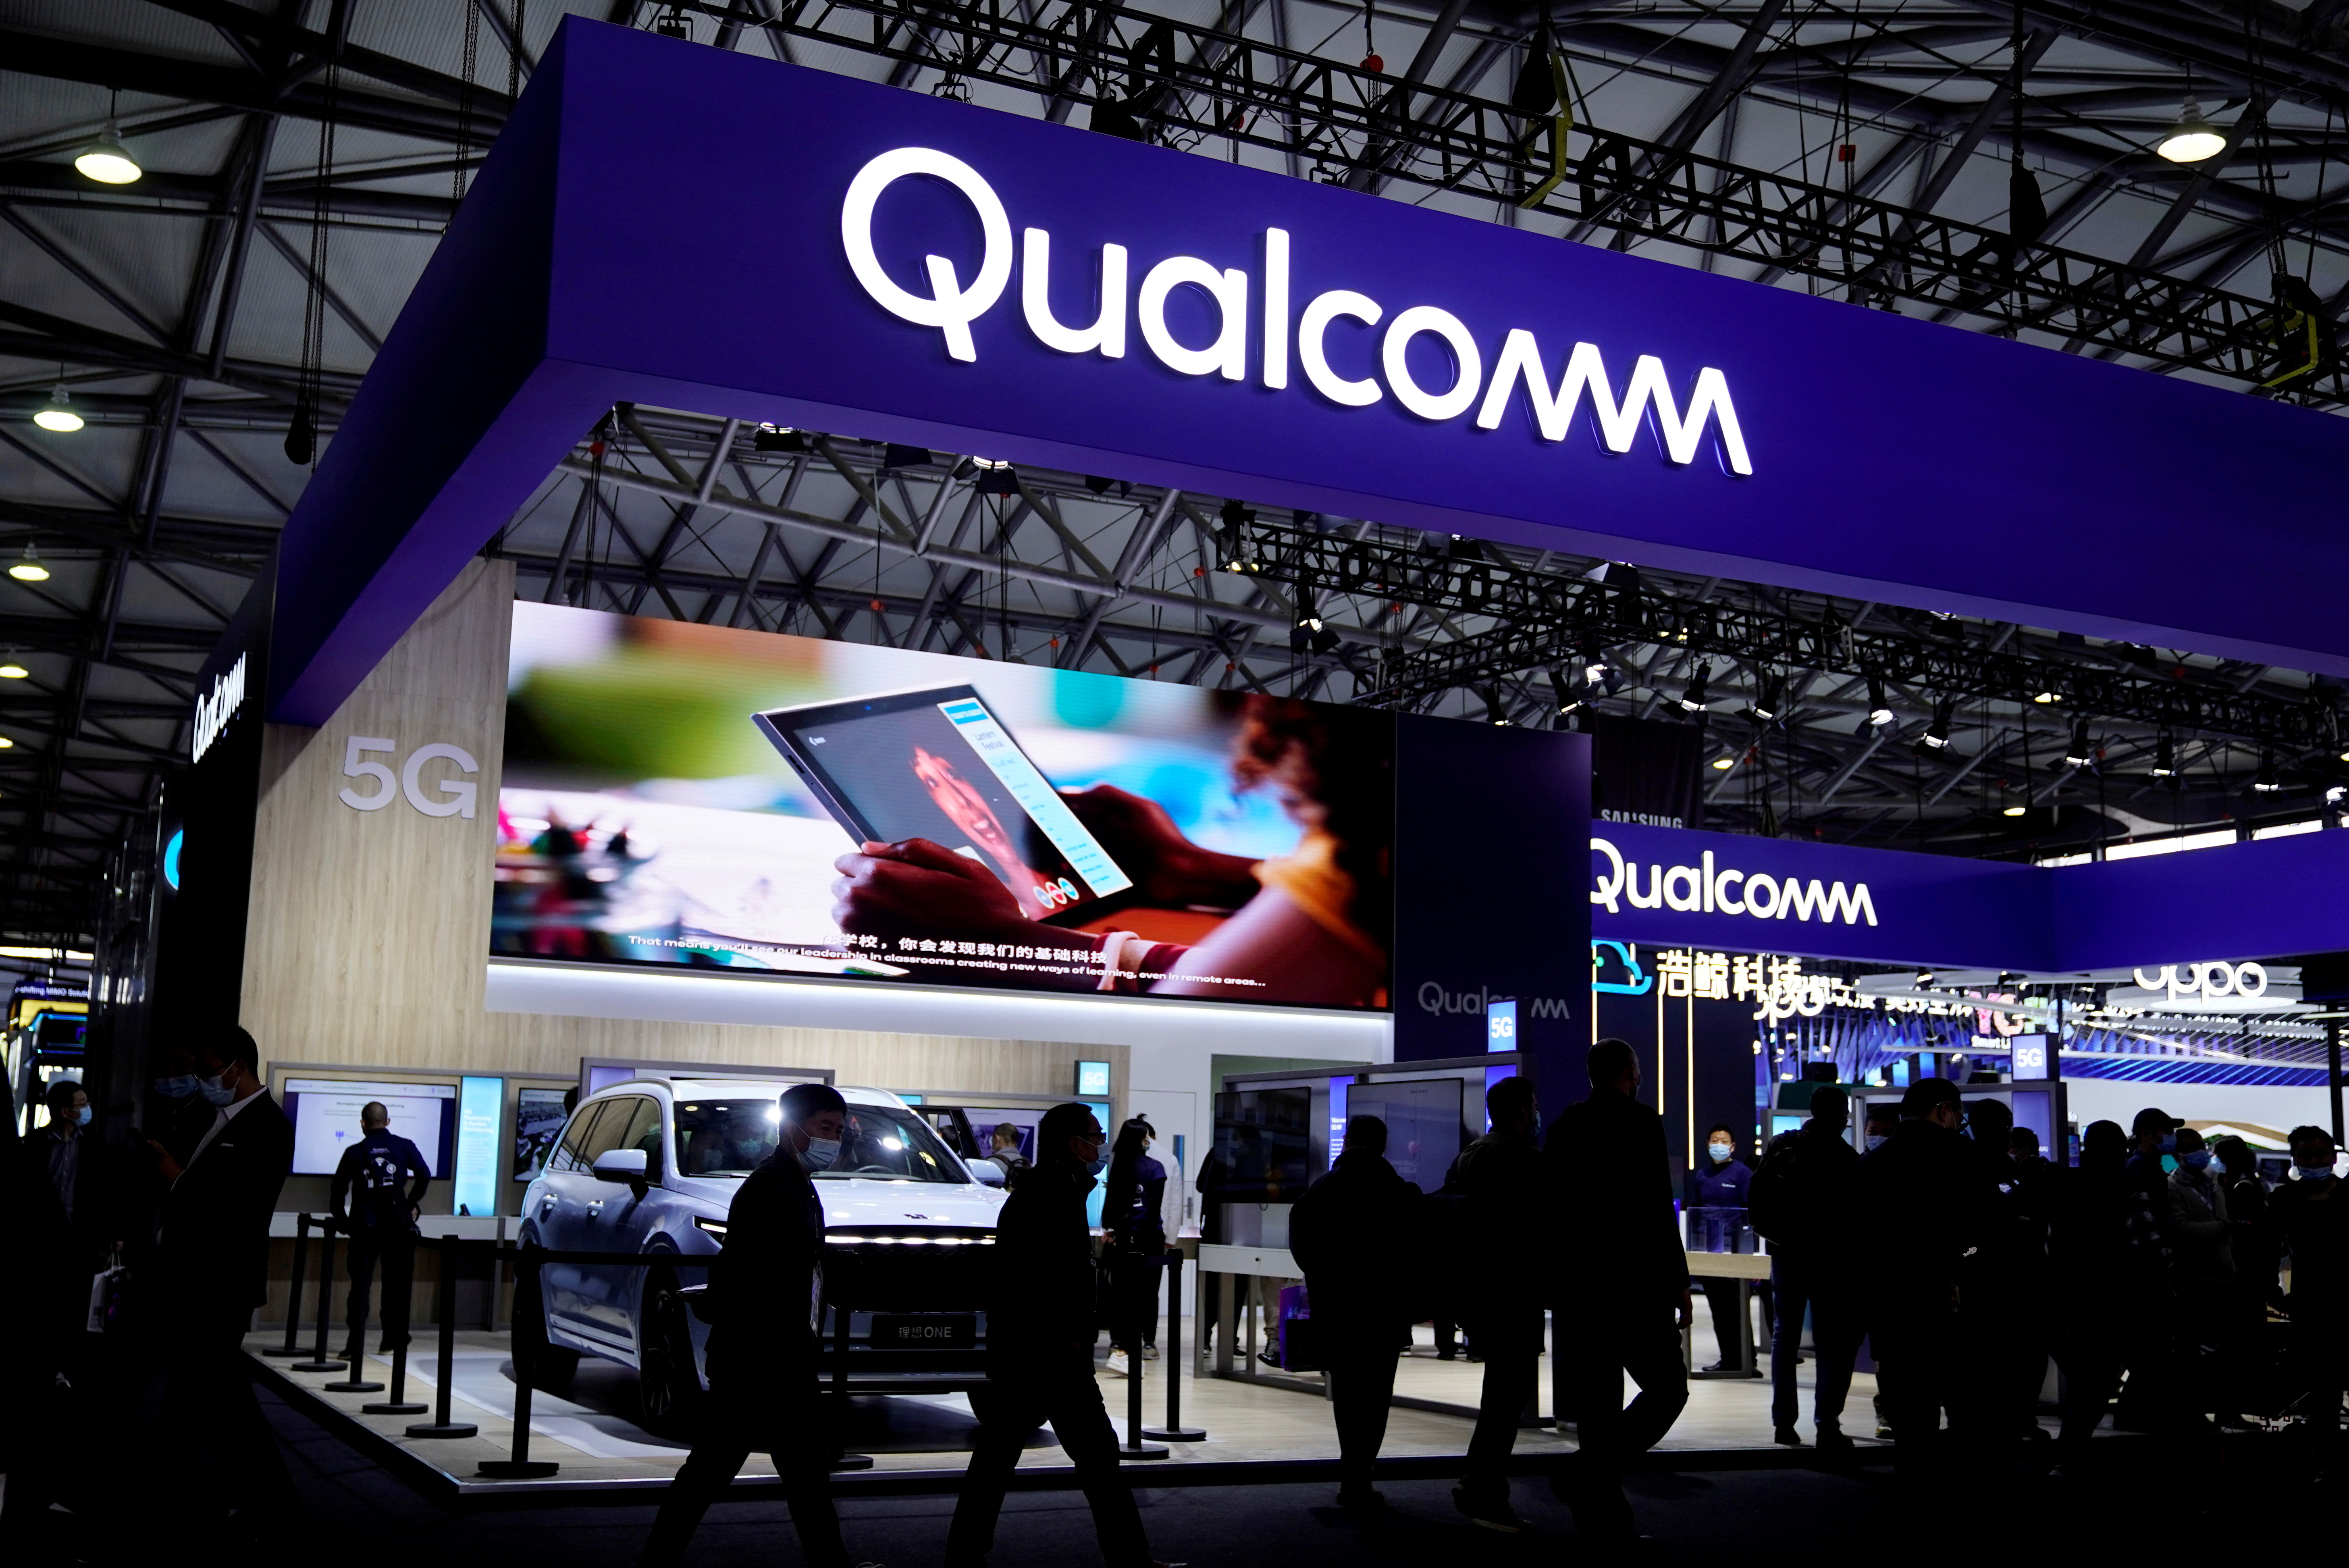 People visit a Qualcomm booth at the Mobile World Congress (MWC) in Shanghai, China February 23, 2021. REUTERS/Aly Song